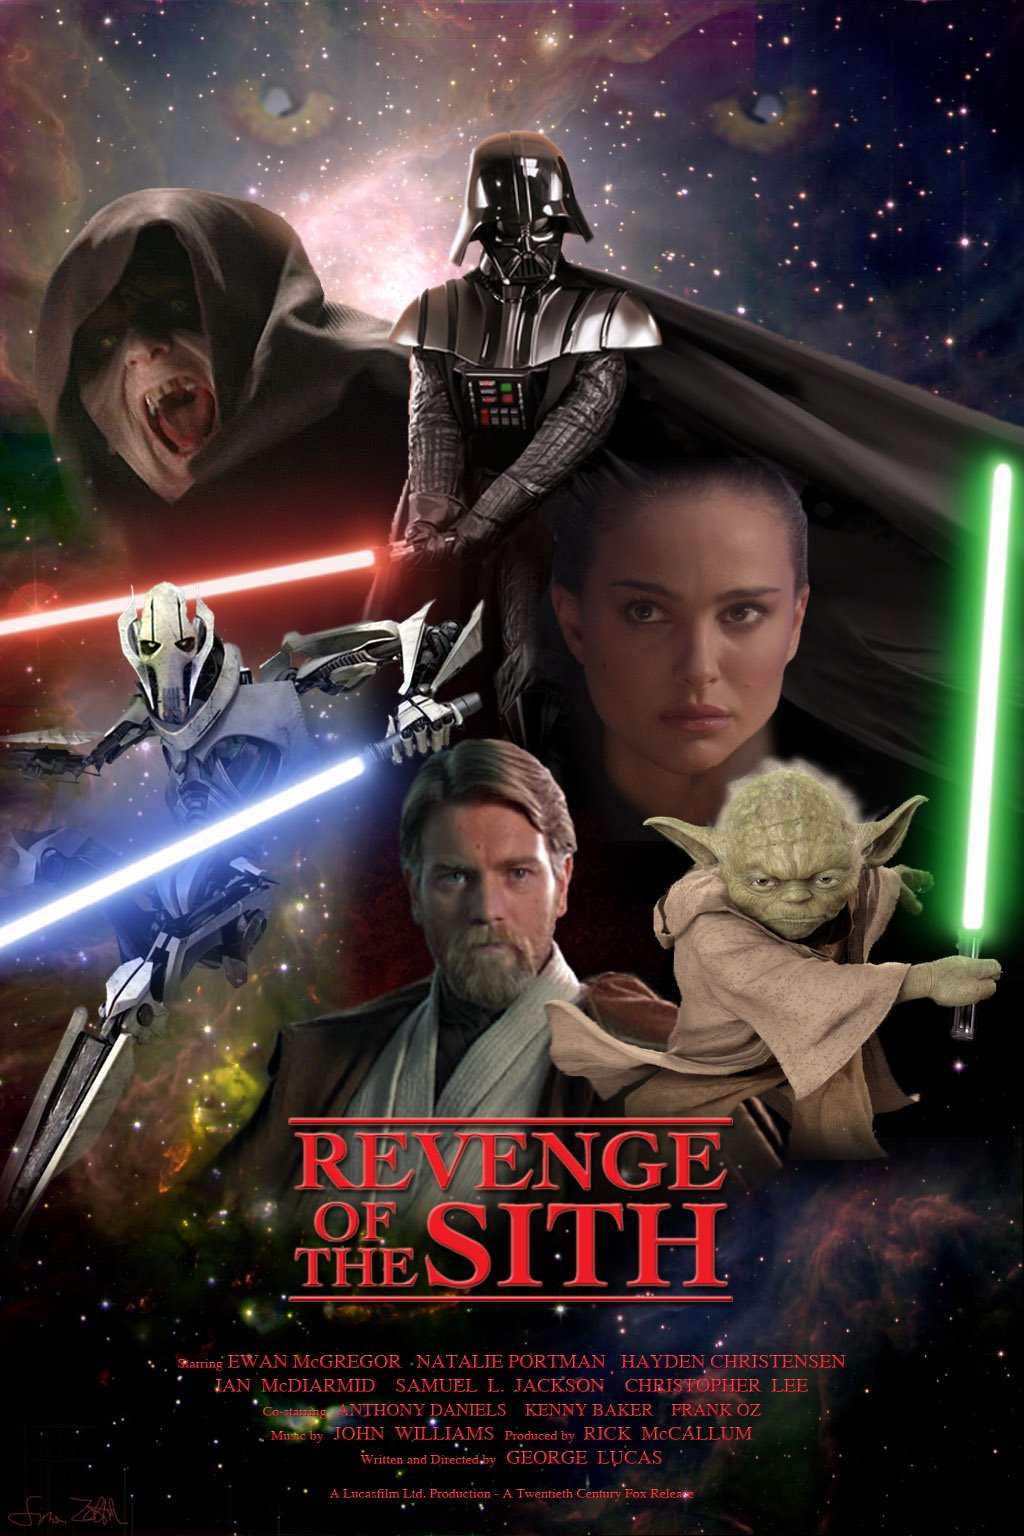 Star Wars Ep. III: Revenge of the Sith for android instal